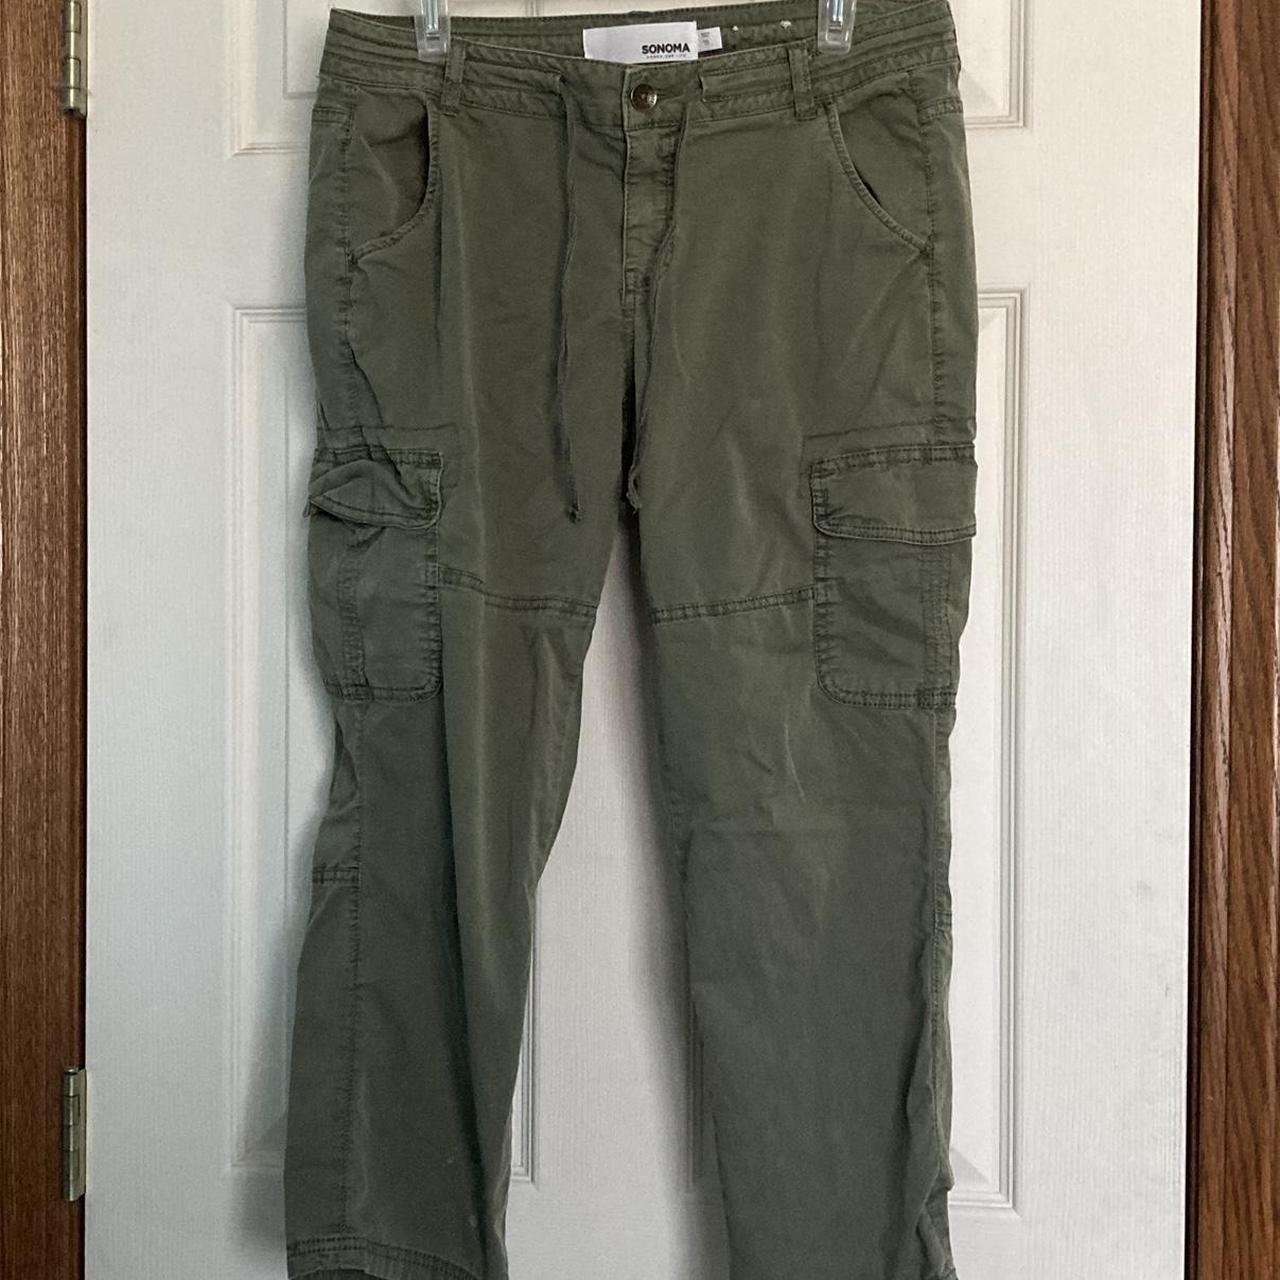 Sonoma Green Pants for Women for sale